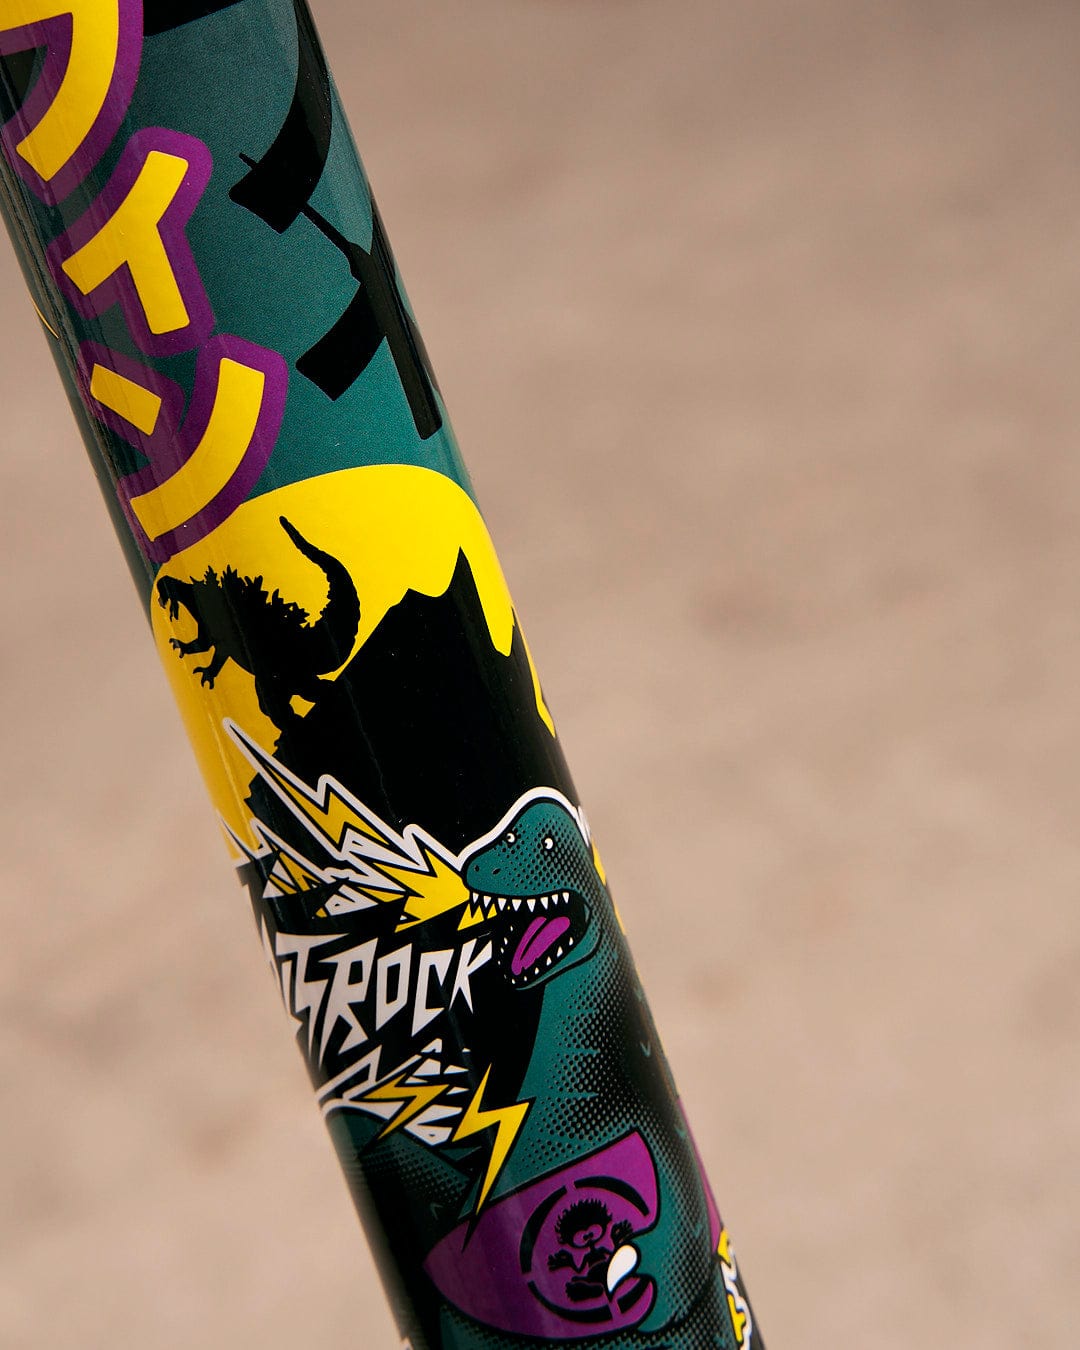 A close up of a Tokyo Smackdown - Stunt Scooter - Black with a dragon on it, made by Saltrock.